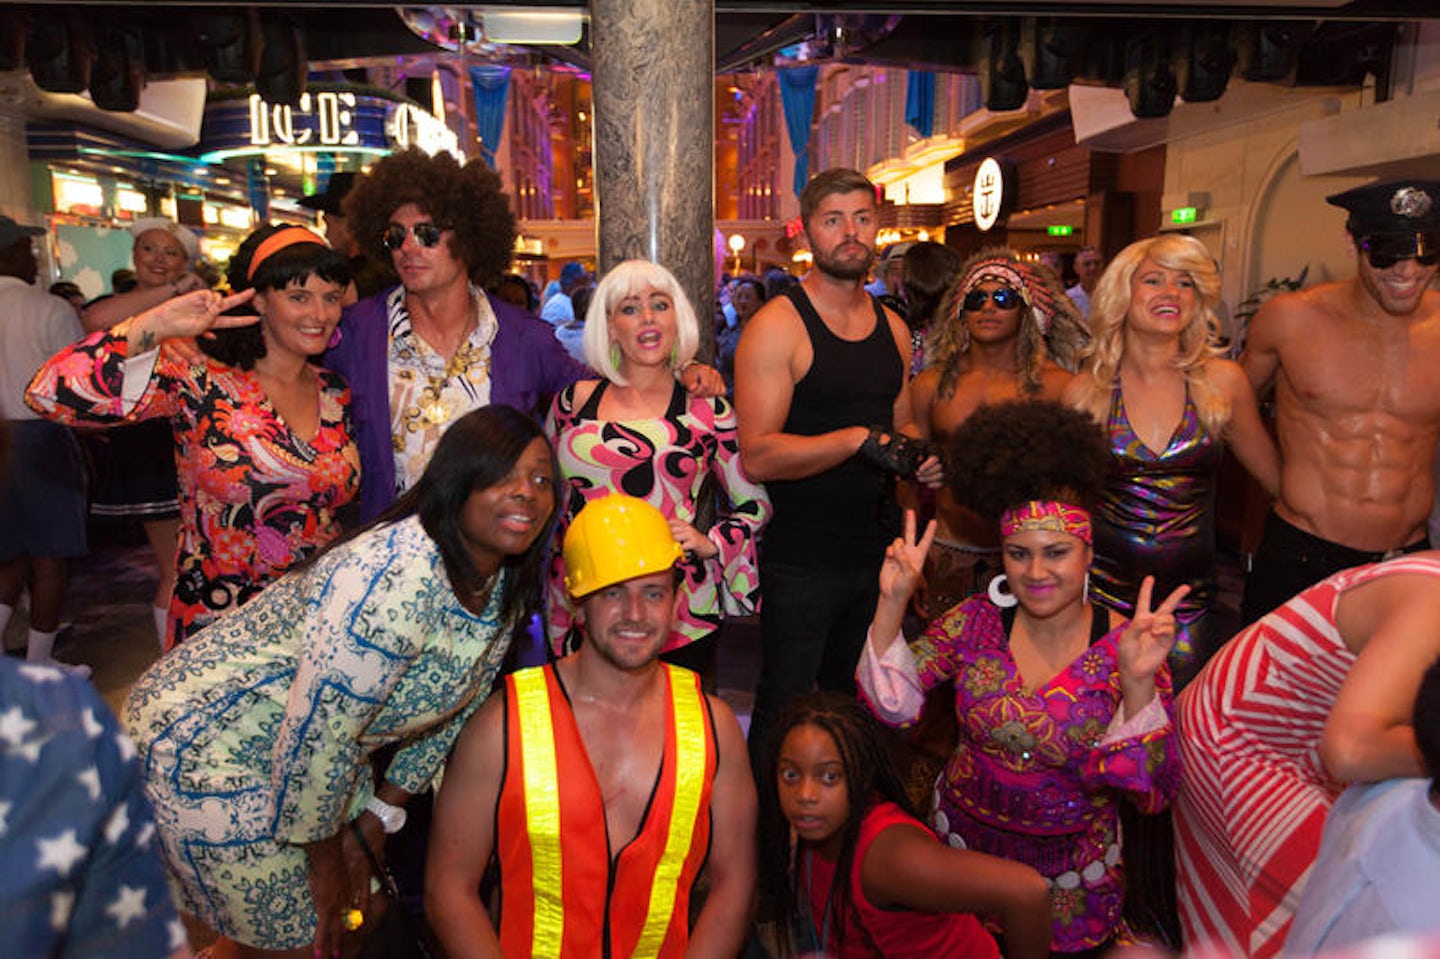 70s Dancing in the Street Disco Inferno Party on Independence of the Seas